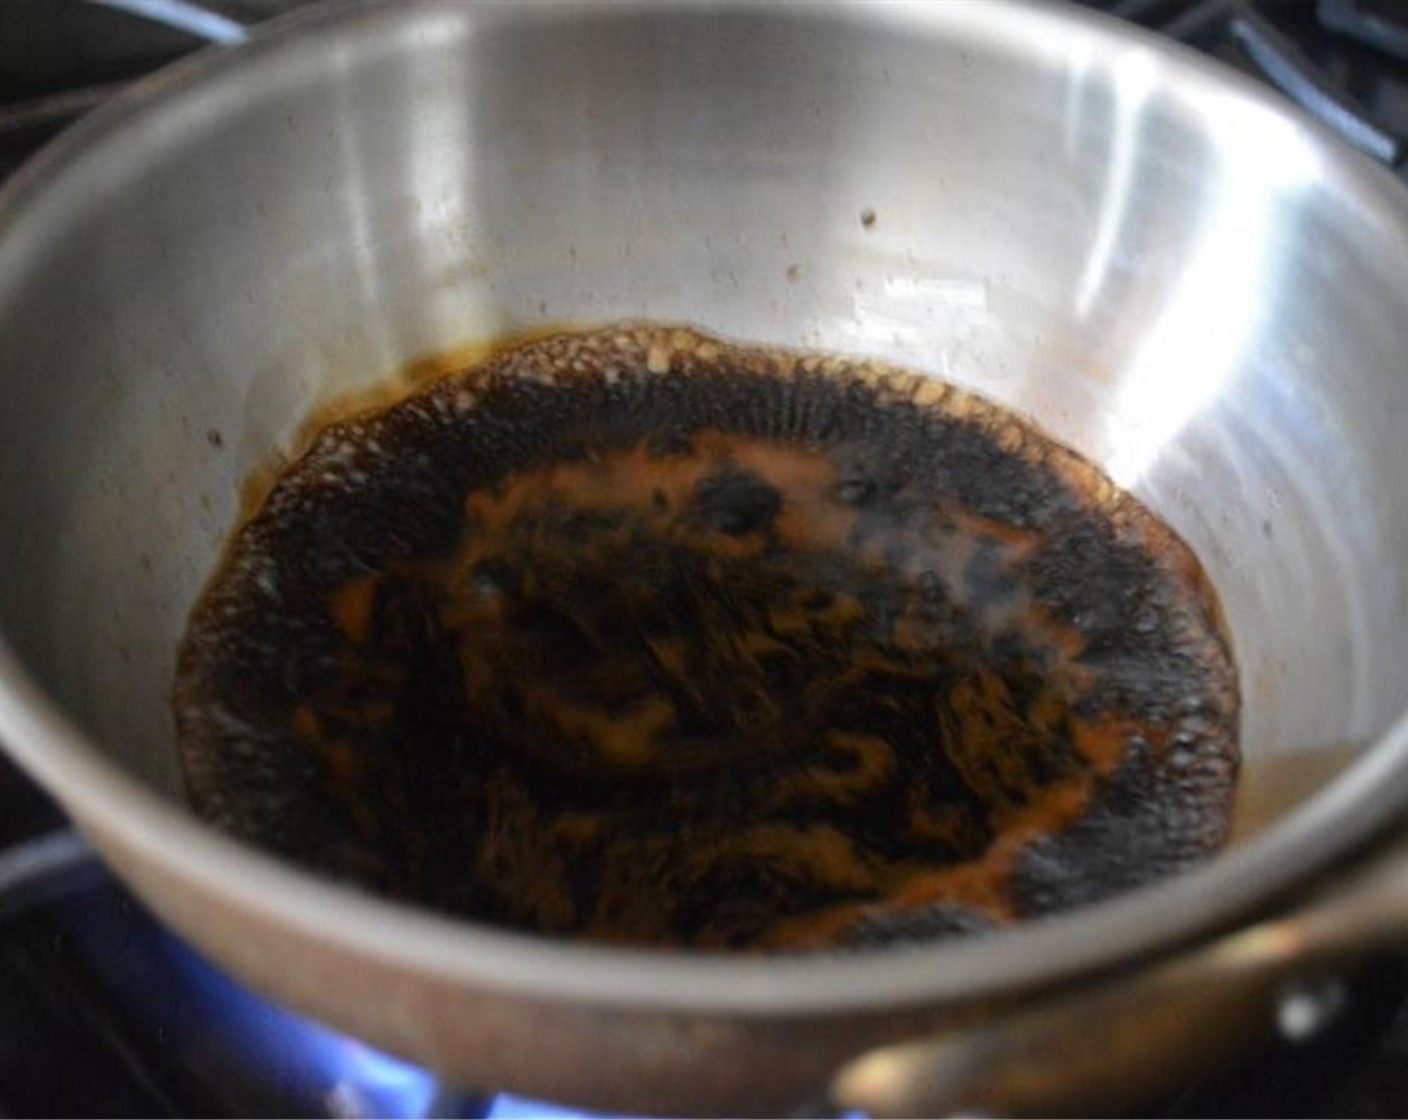 step 5 Meanwhile, make the balsamic reduction. In a small pot, bring the Balsamic Vinegar (1/2 cup) to a gentle boil over medium heat on the stove. Let it reduce by half into a thicker syrup. Take it off of the heat and set it aside.